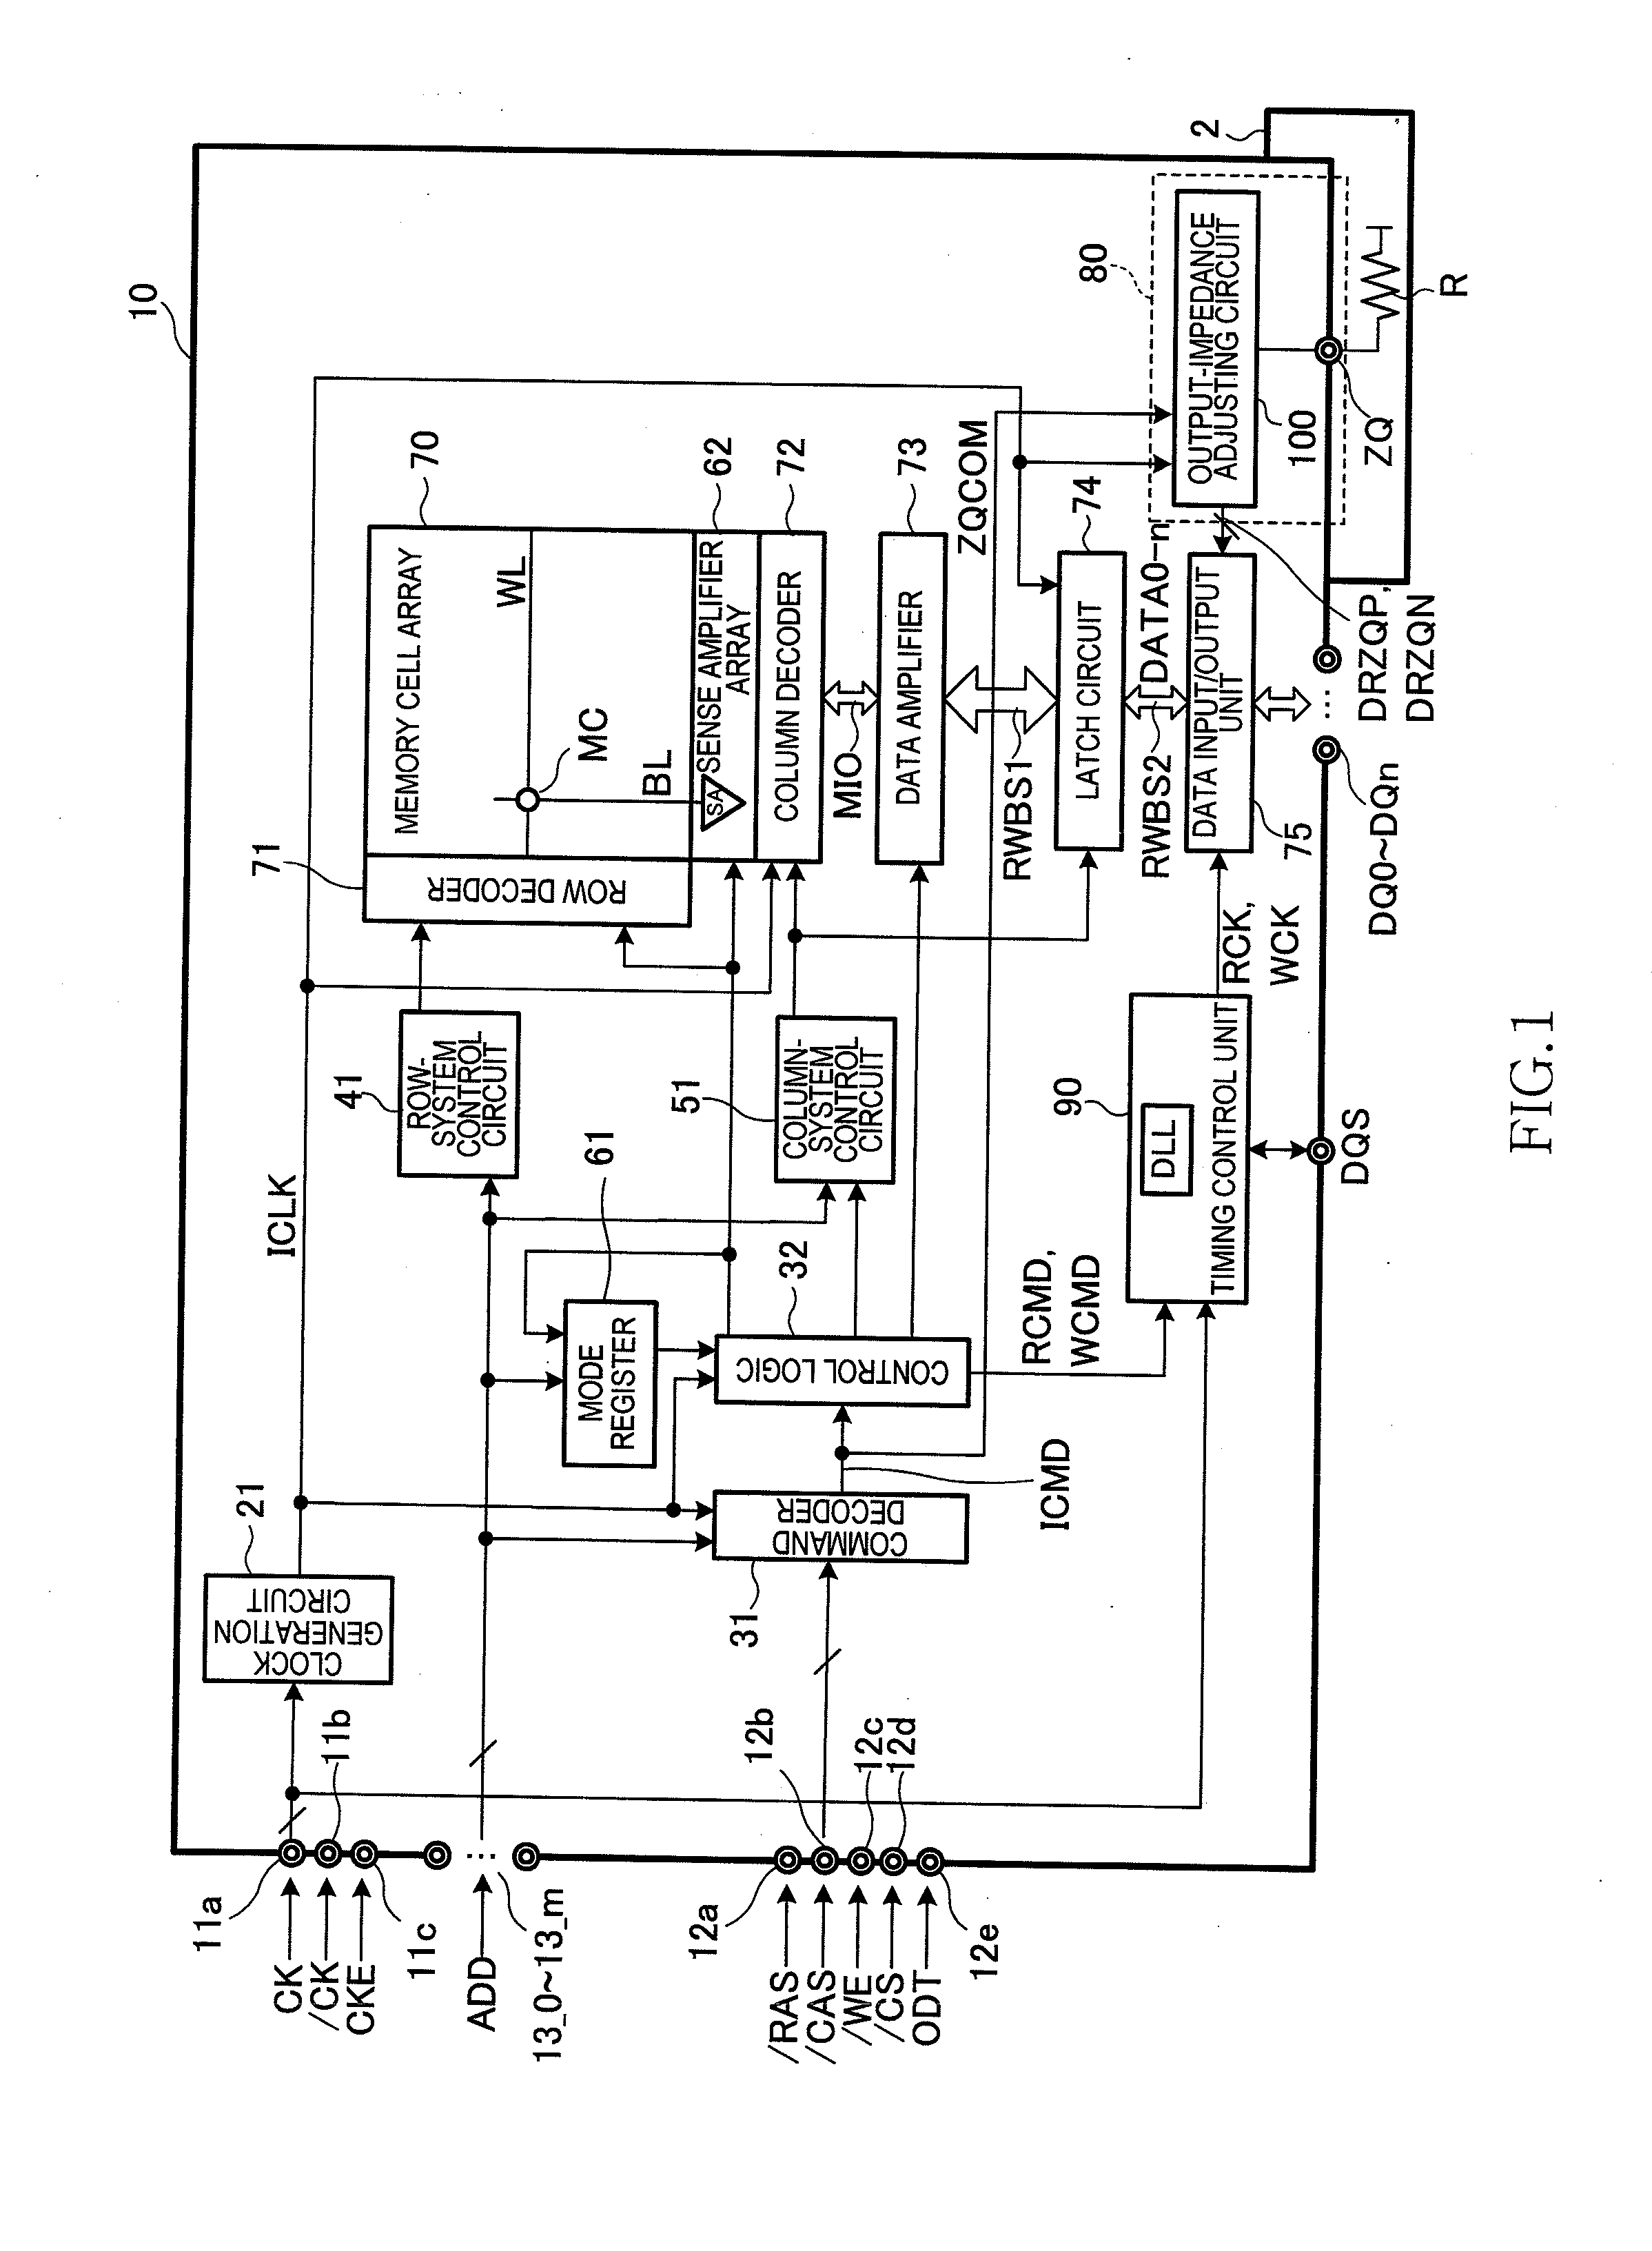 Semiconductor device and circuit board having the semiconductor device mounted thereon